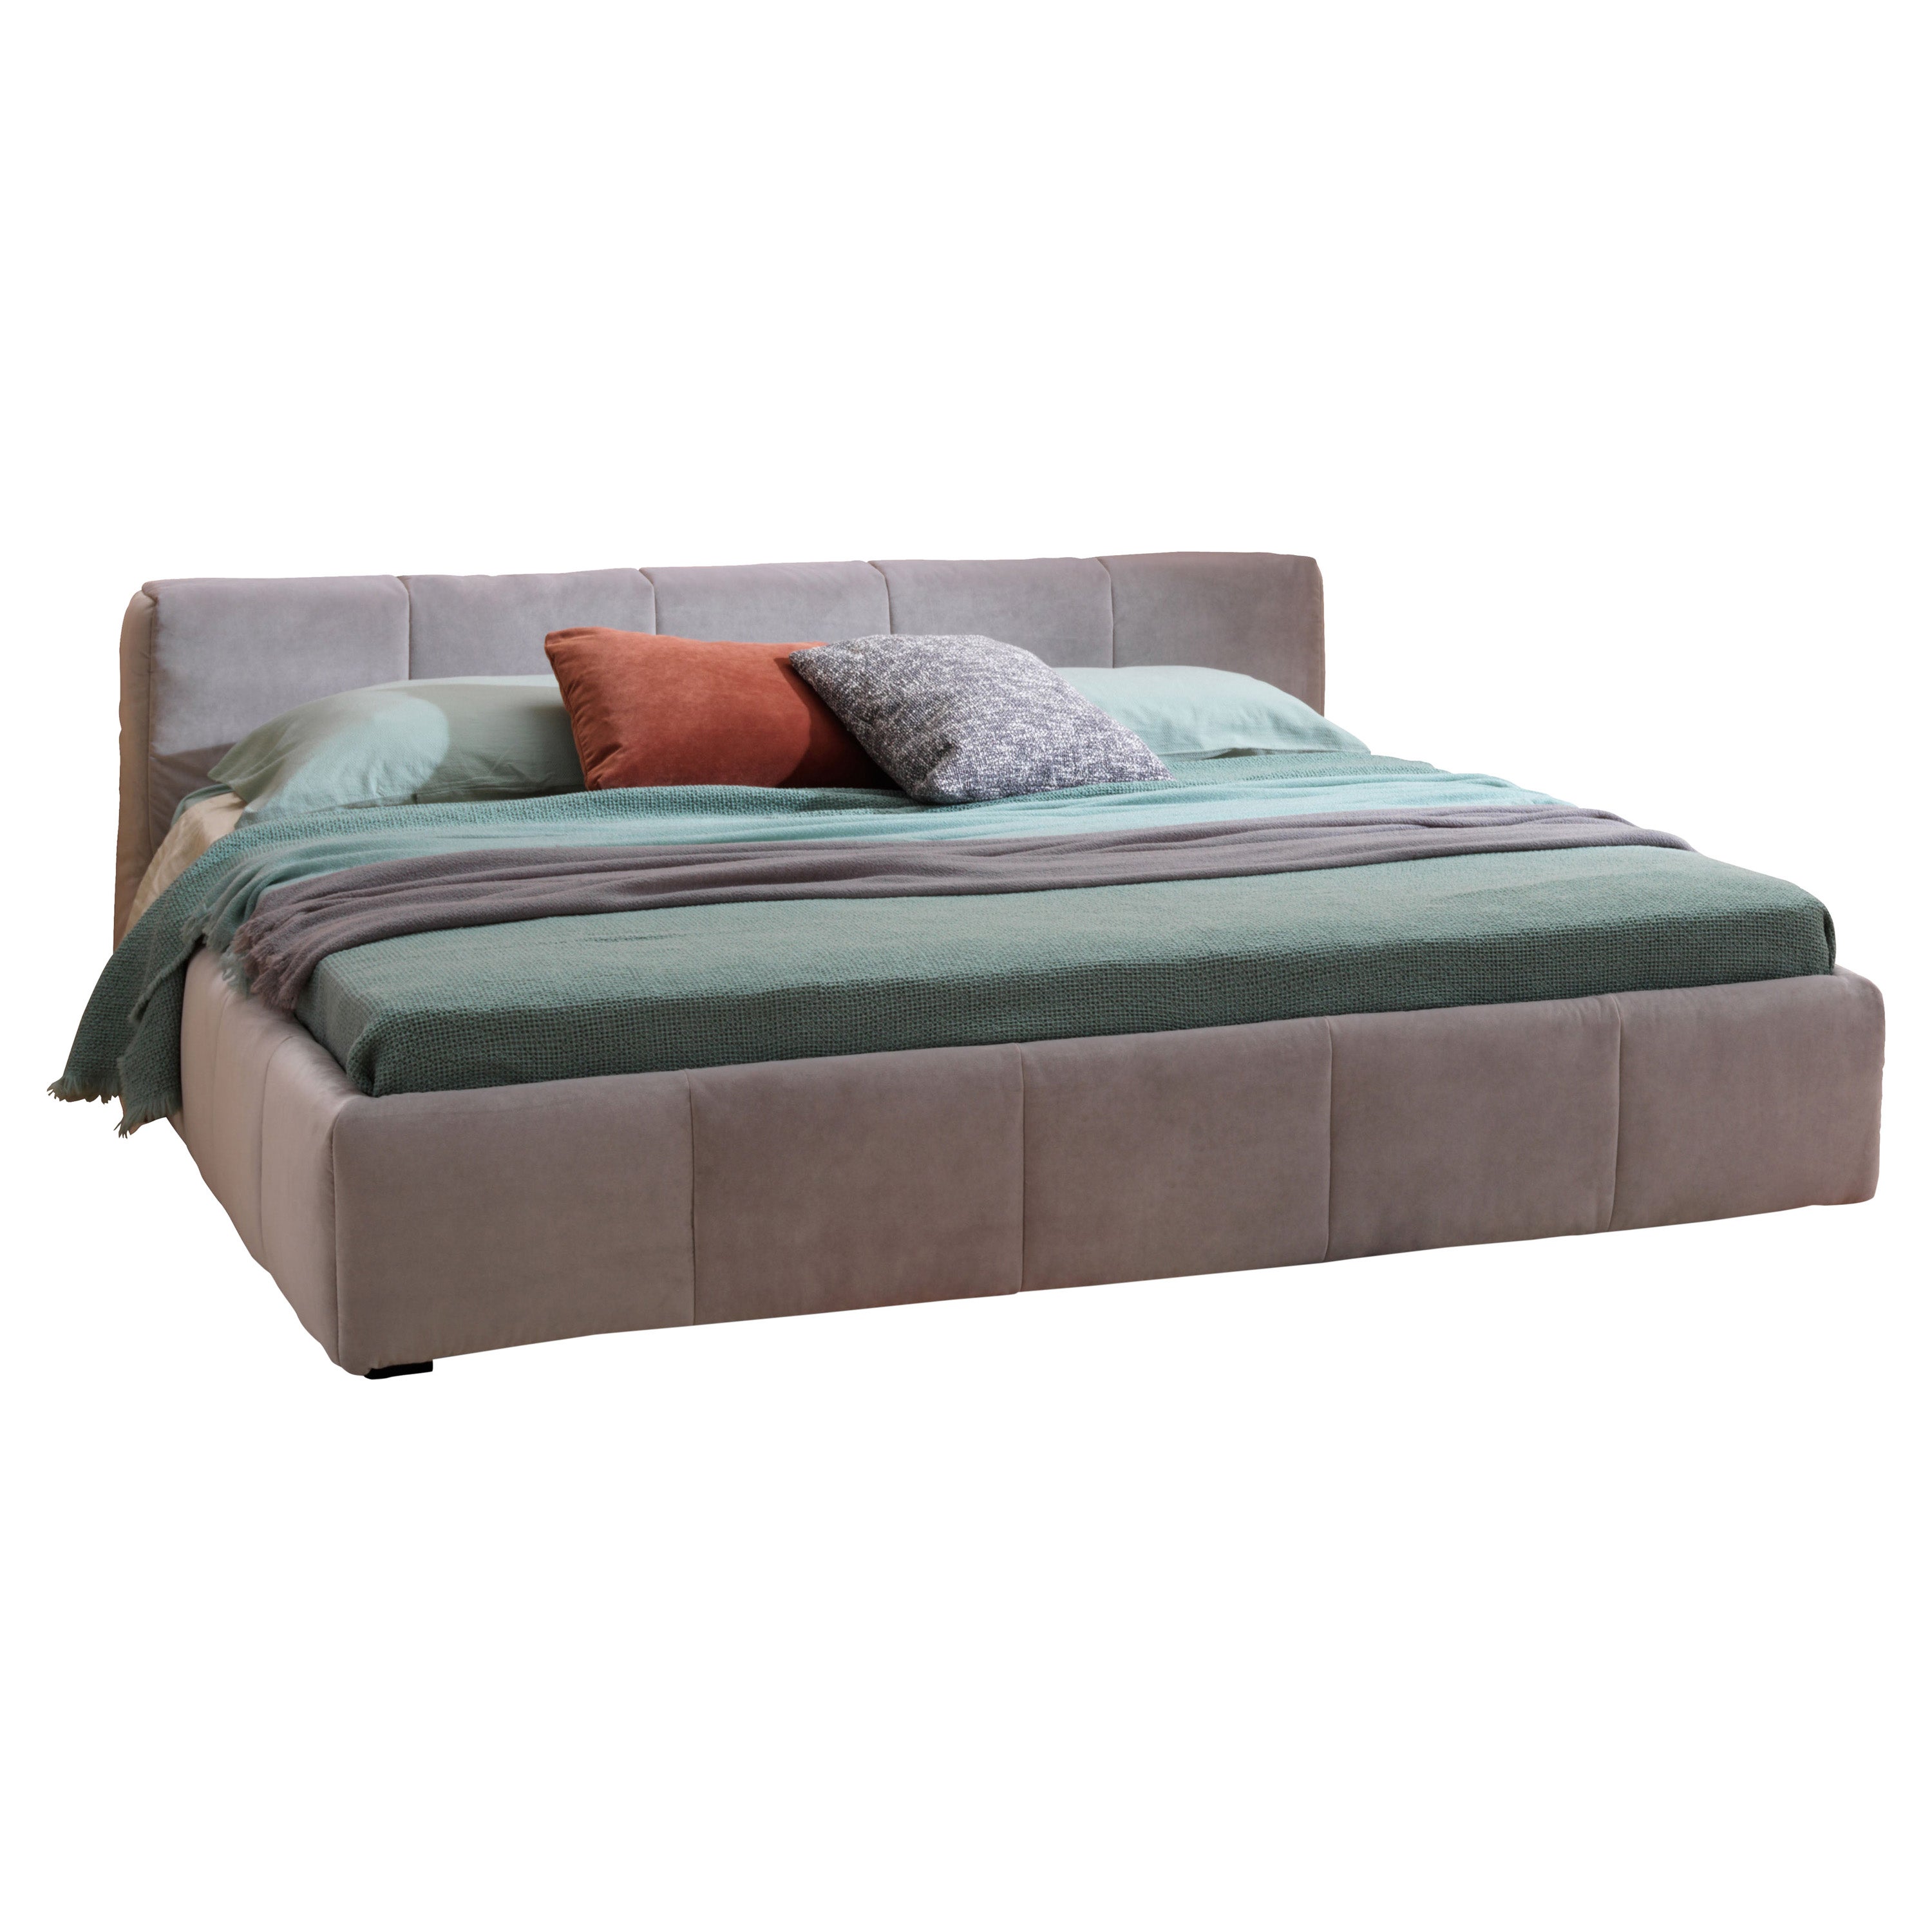 Pixel Box Queen Size Bed in Velvet Upholstery with Base by Sergio Bicego For Sale